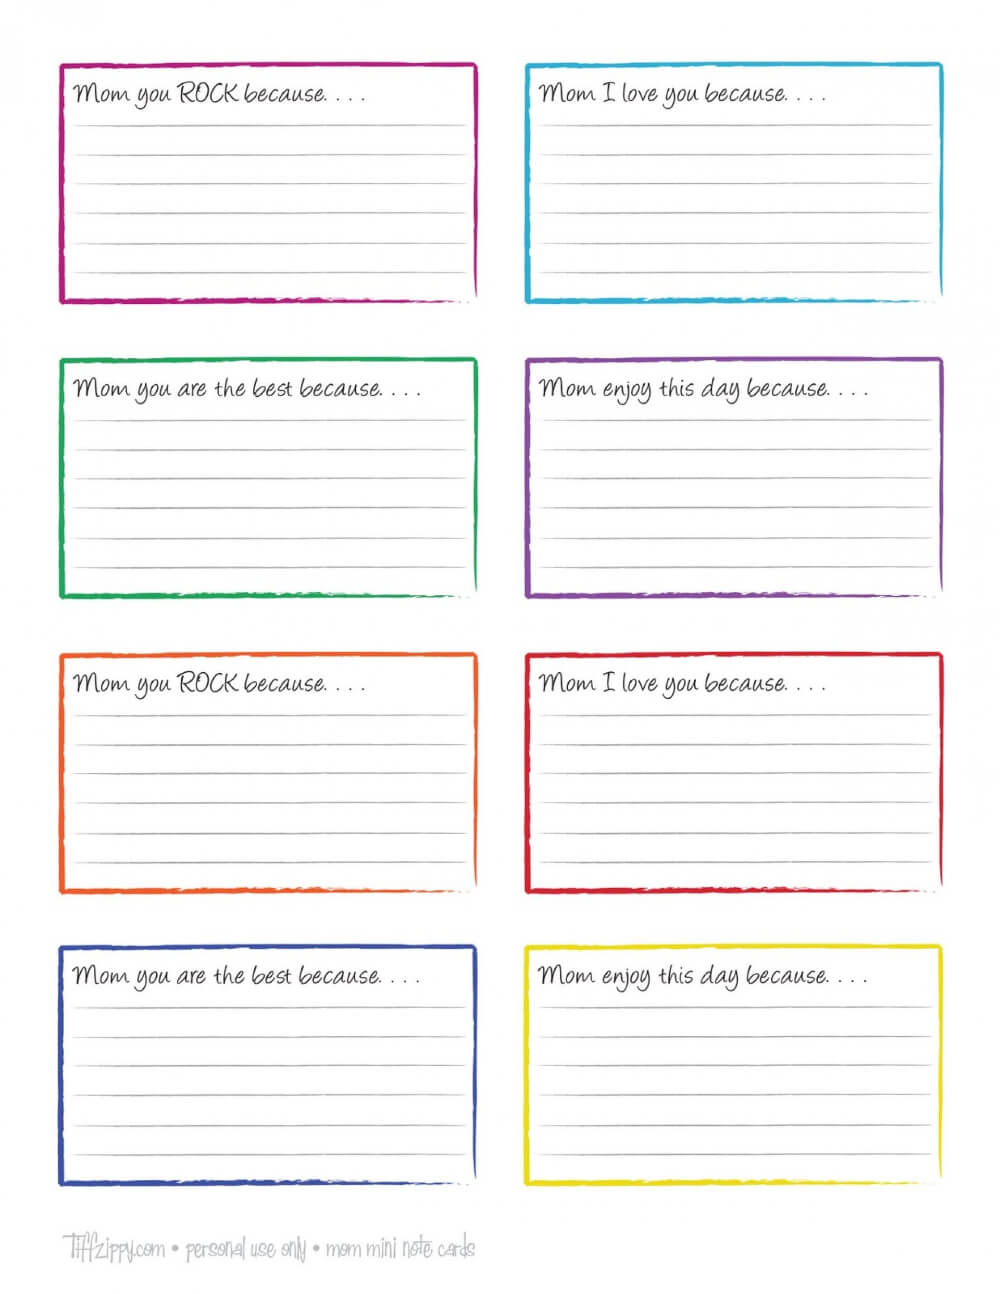 Examples Of Notecards For Research Paper Placement X Index Intended For 3 X 5 Index Card Template